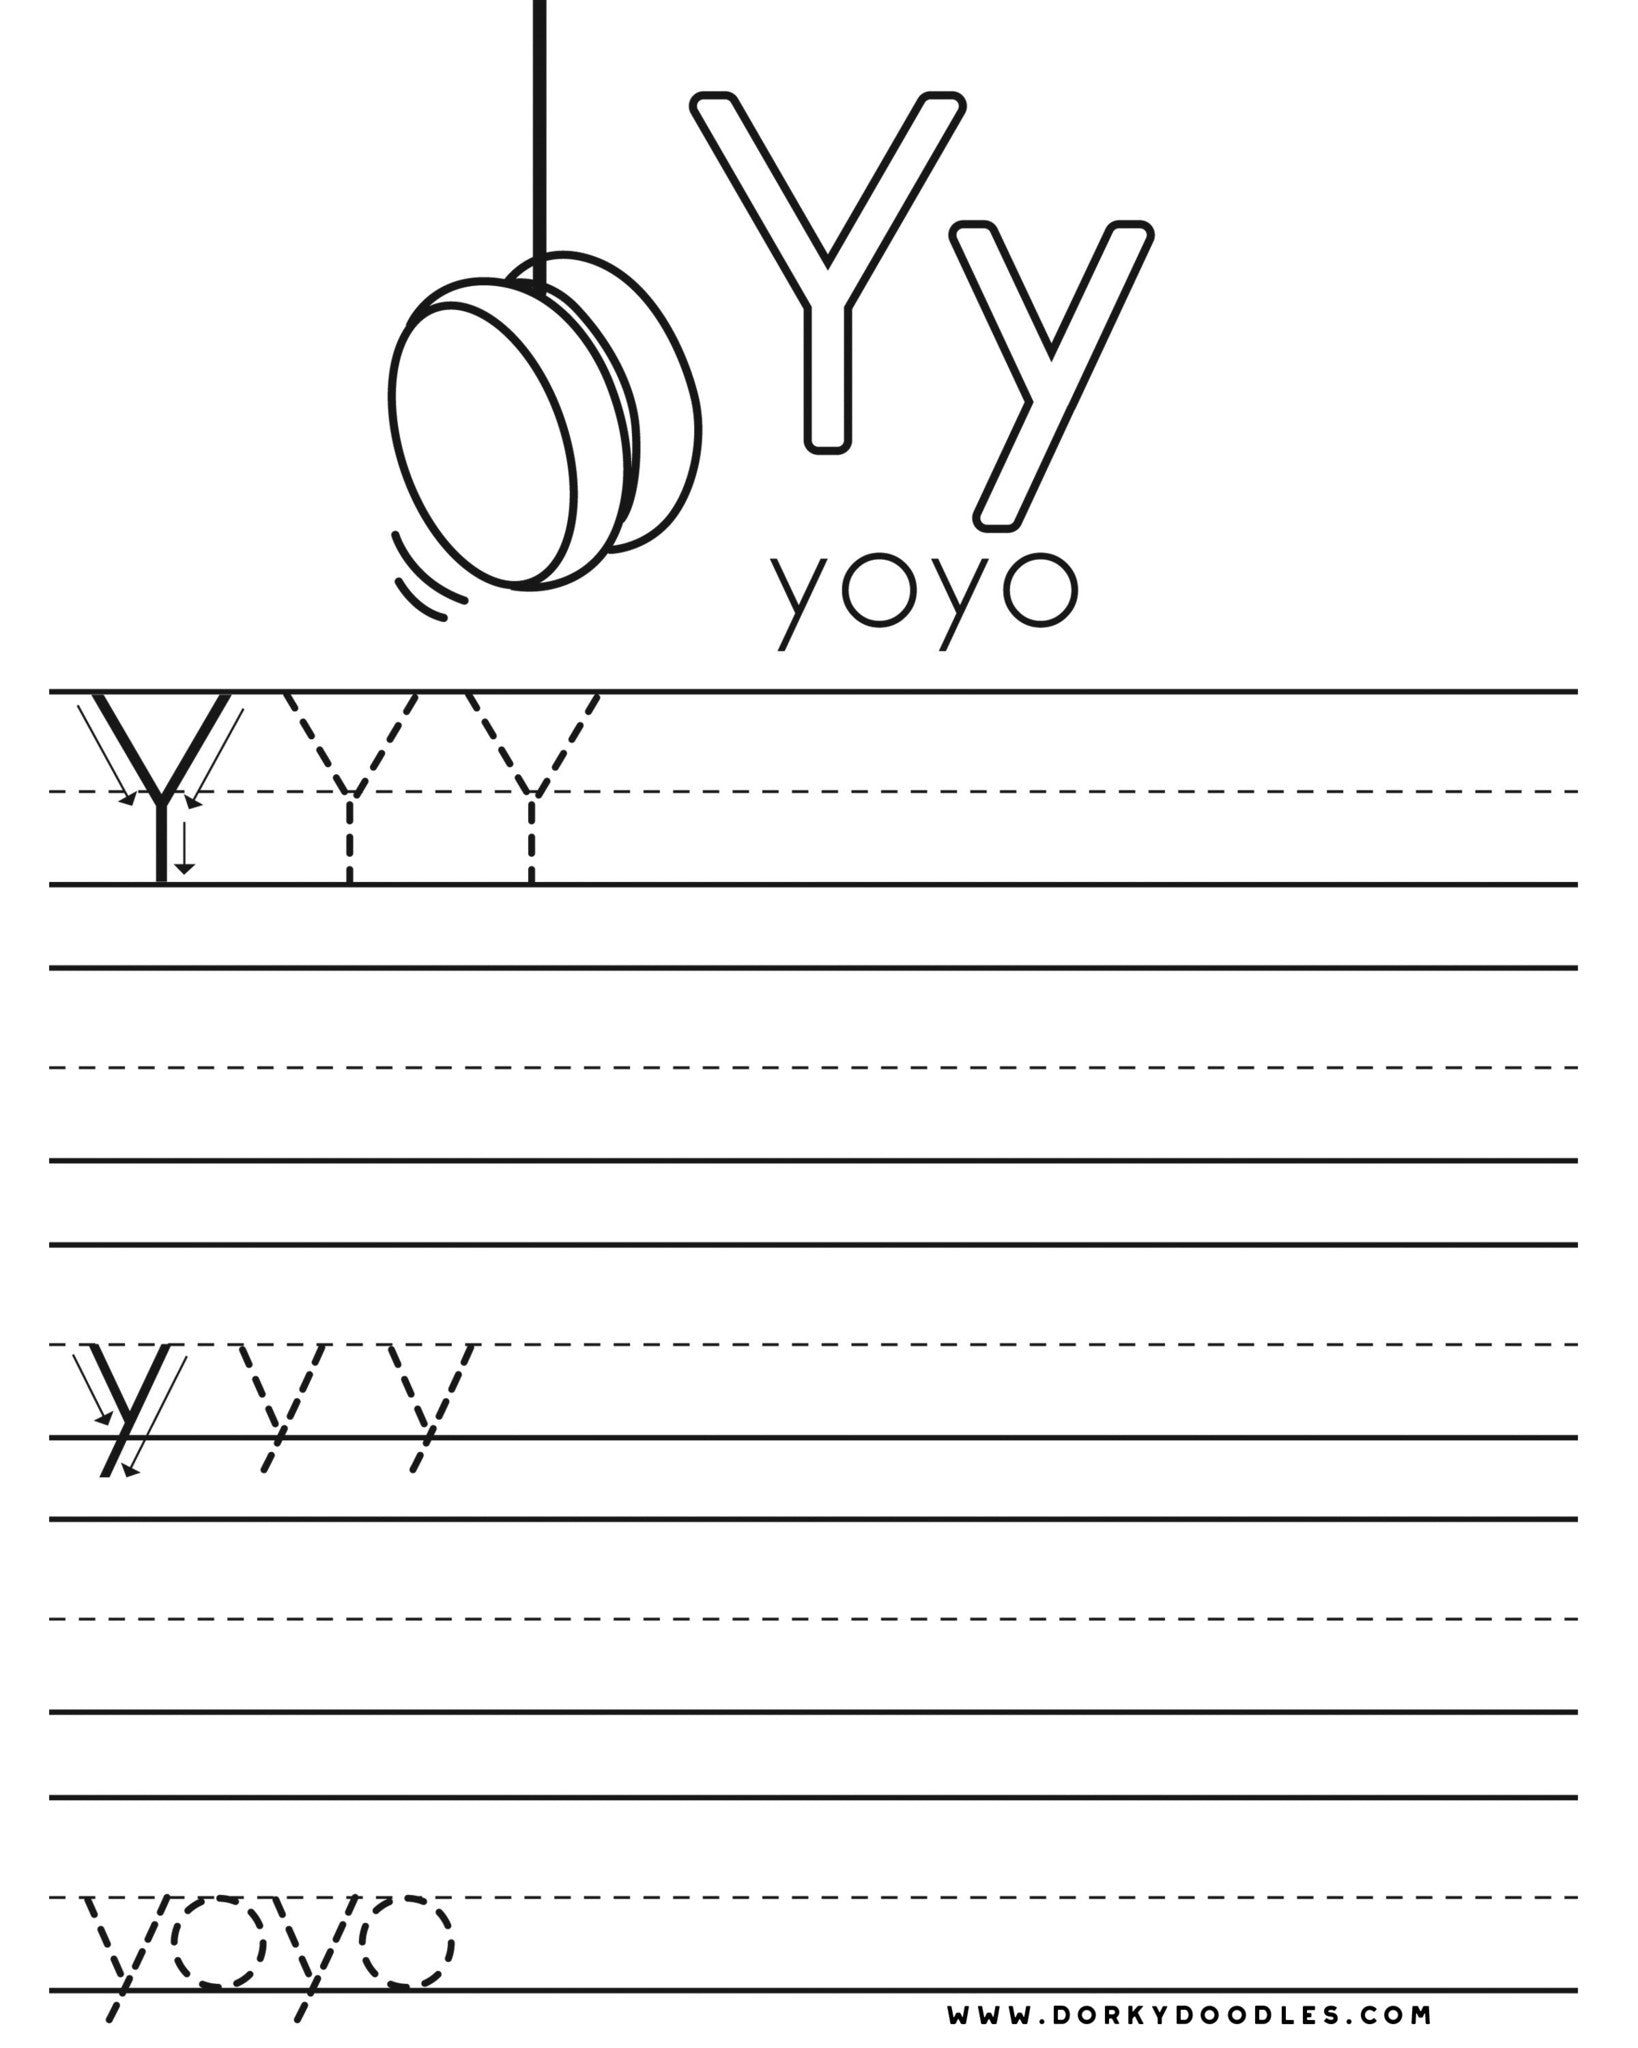 writing-letter-y-worksheets-free-download-goodimg-co